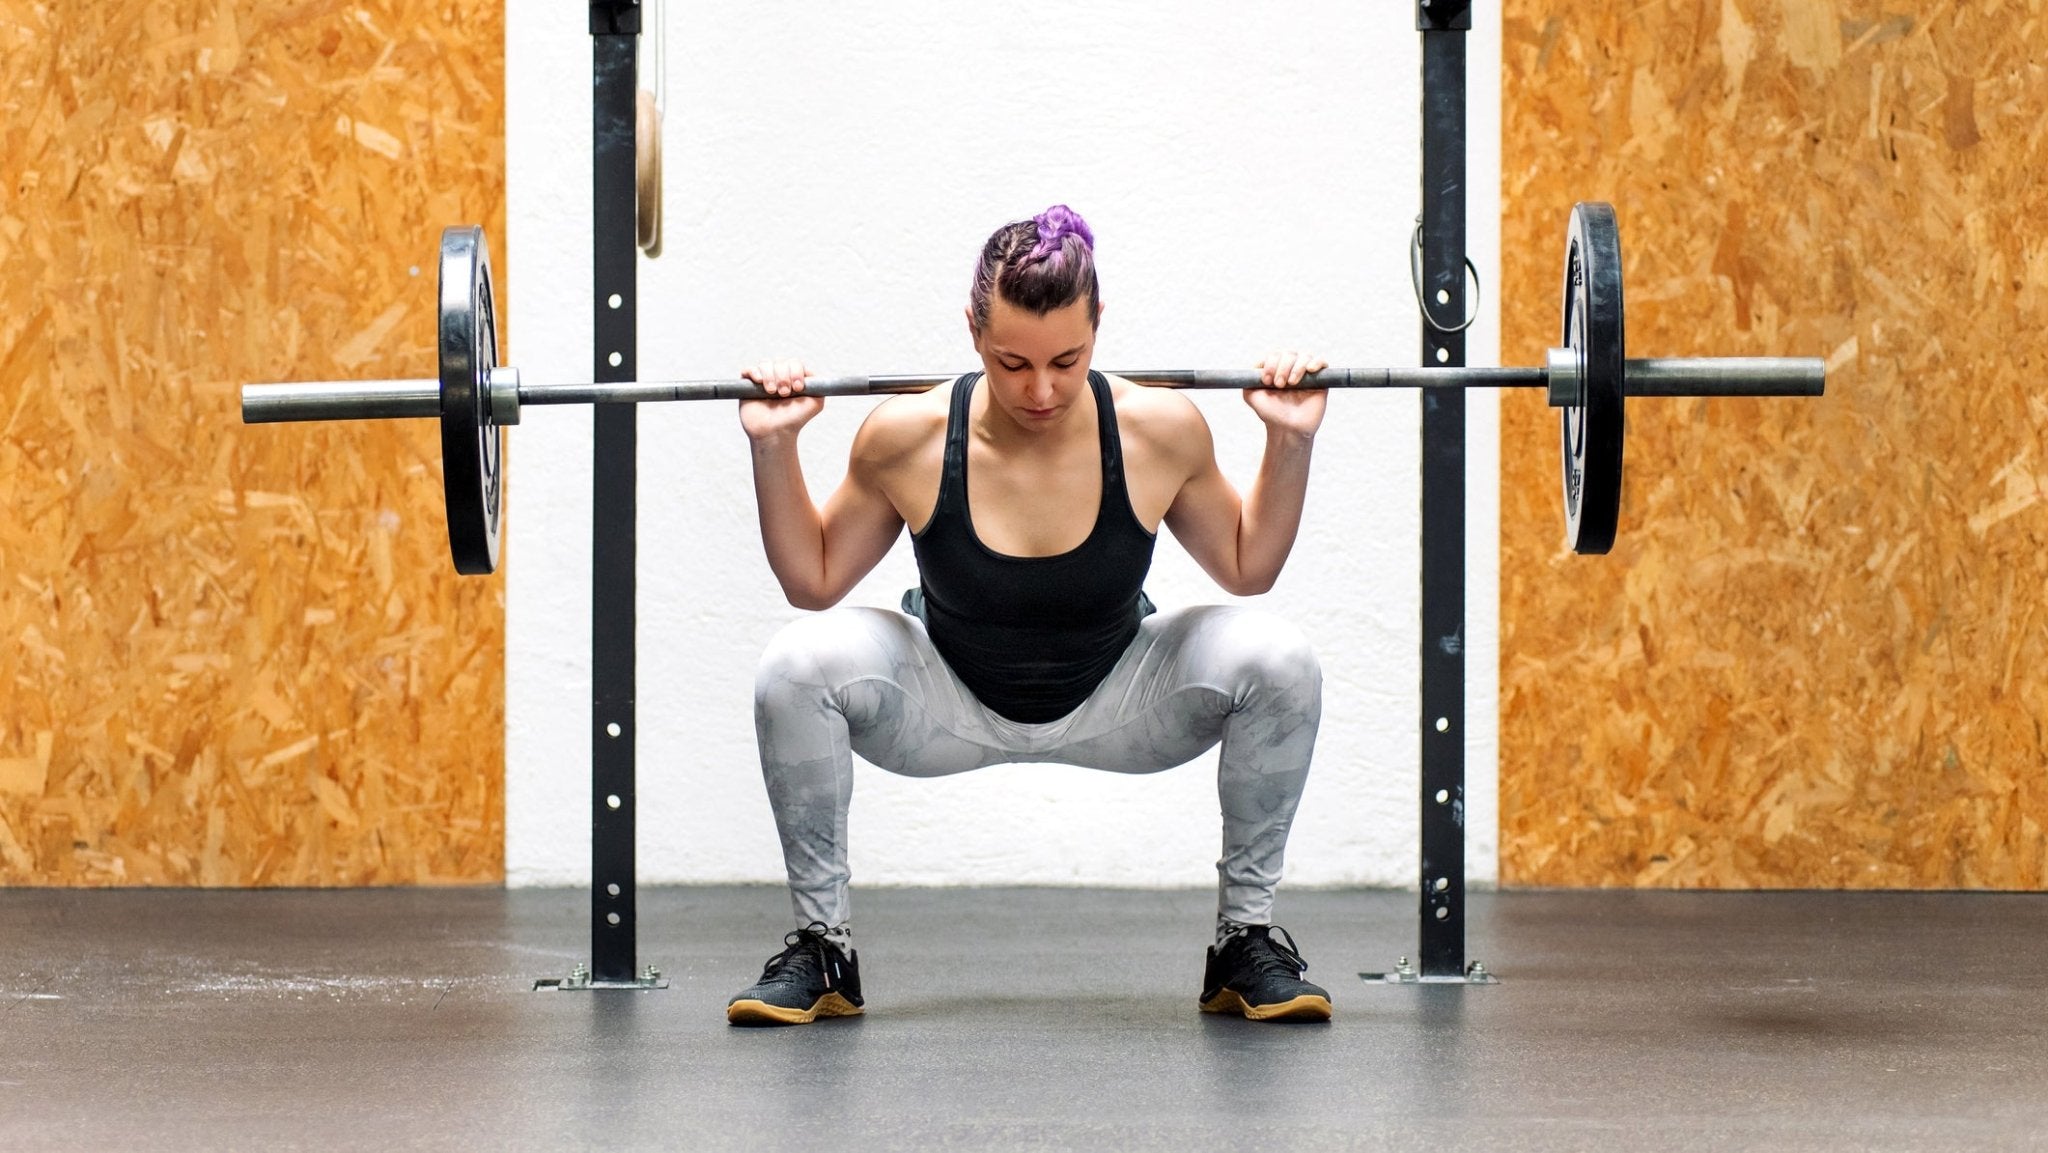 How to Wear a Weightlifting Belt When Performing a Back Squat